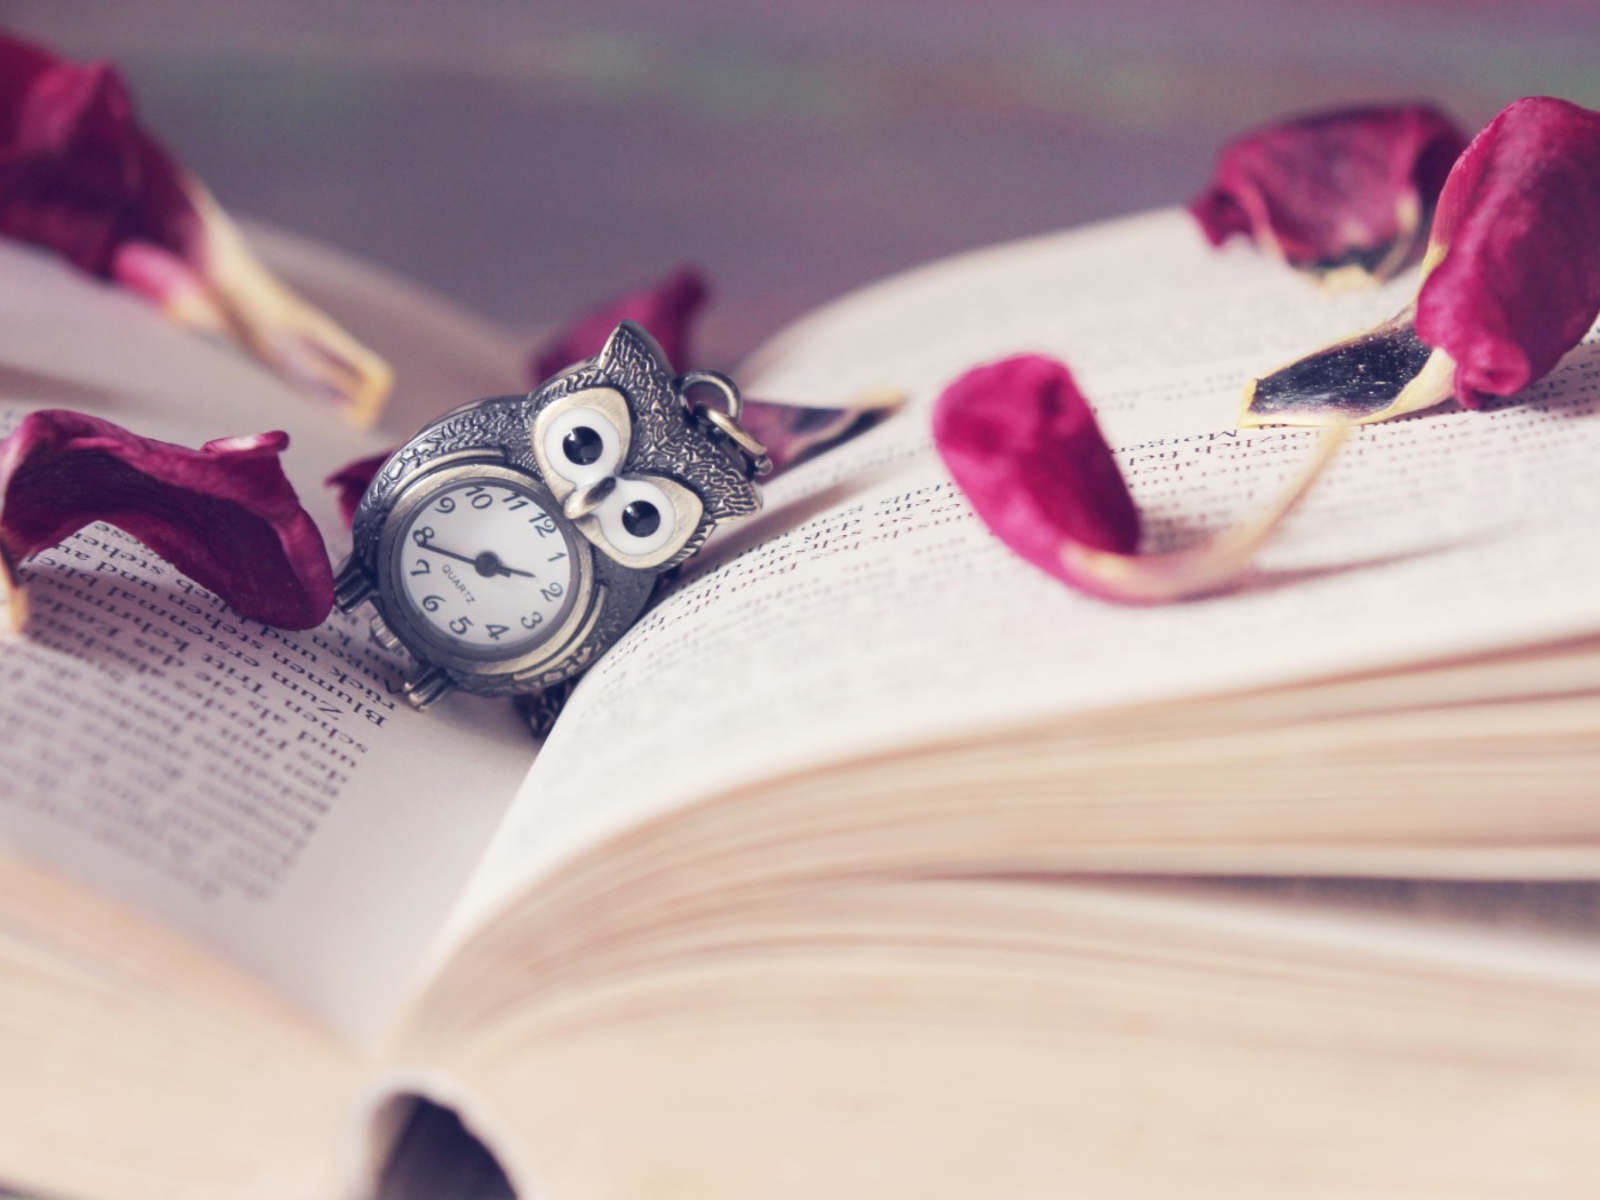 Vintage Owl Watch And Book wallpaper 1600x1200